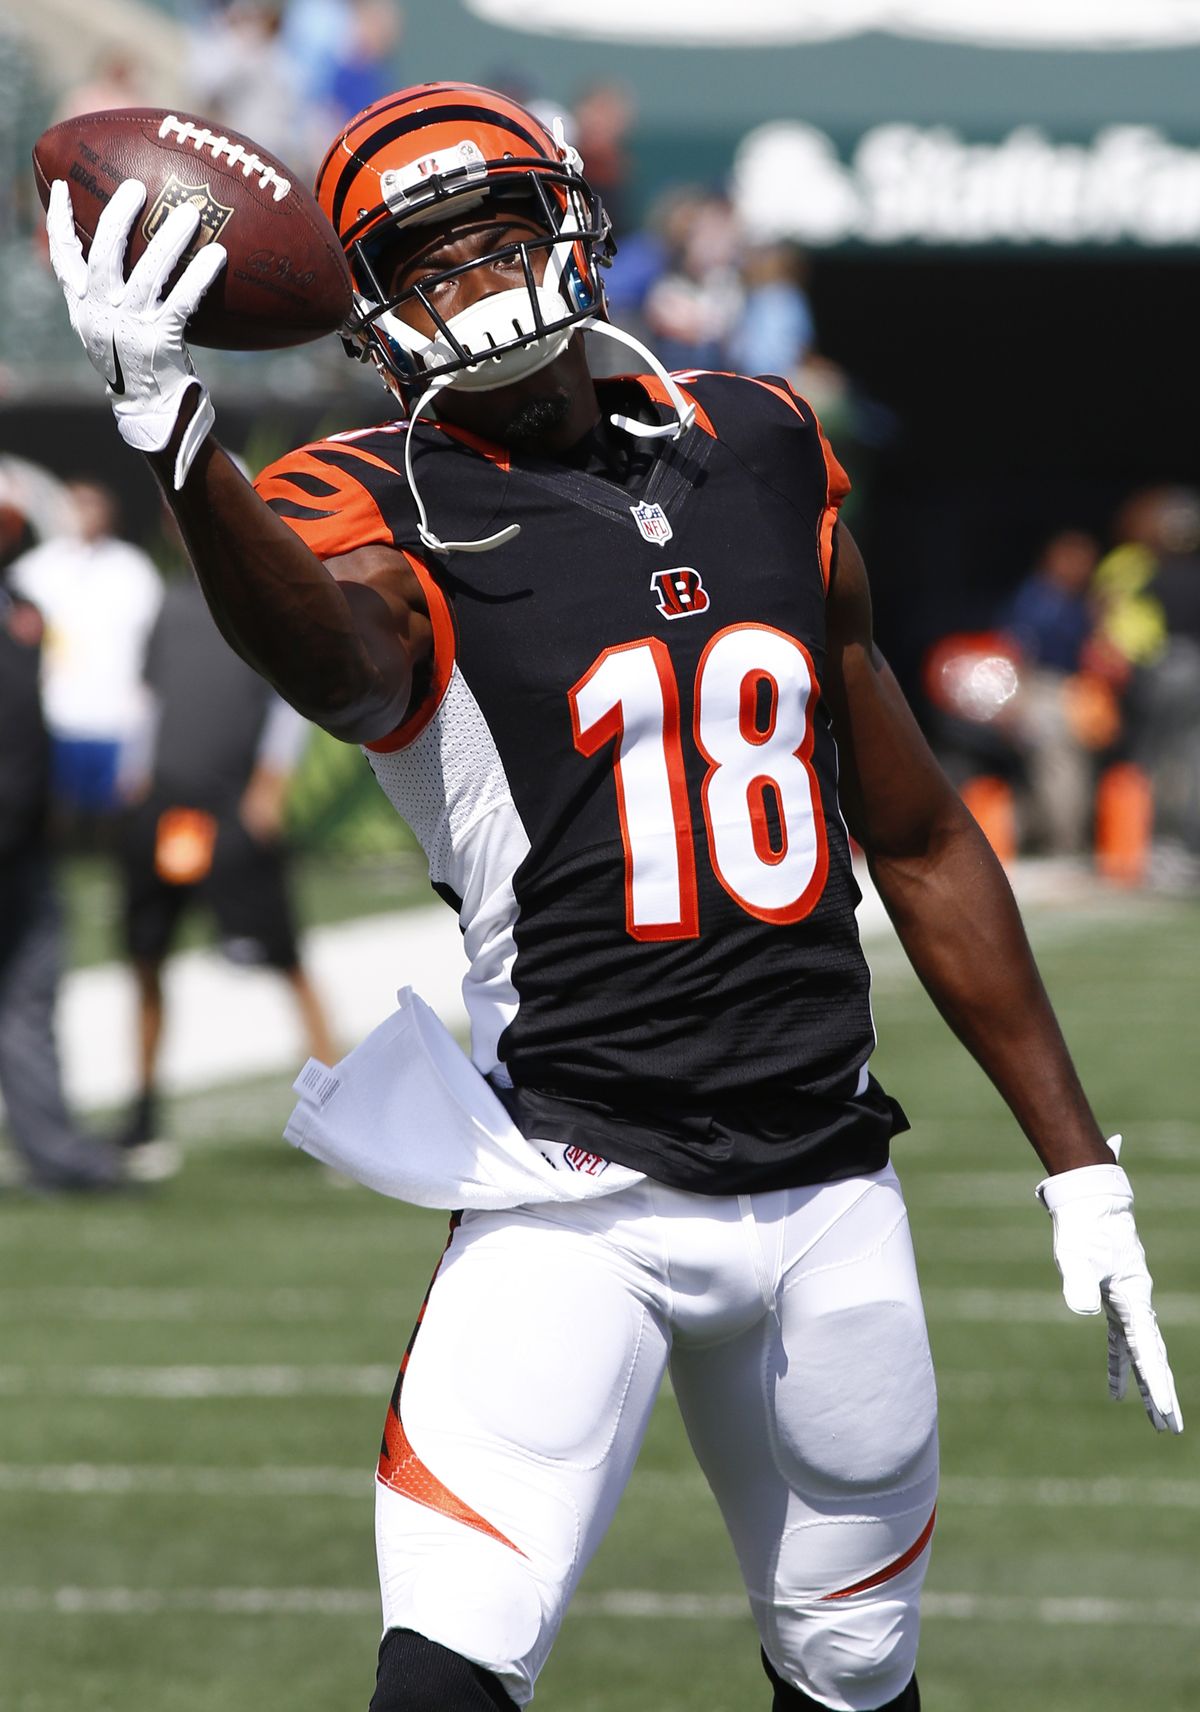 Cincinnati will be without playmaking WR A.J. Green today against Carolina. (Associated Press)